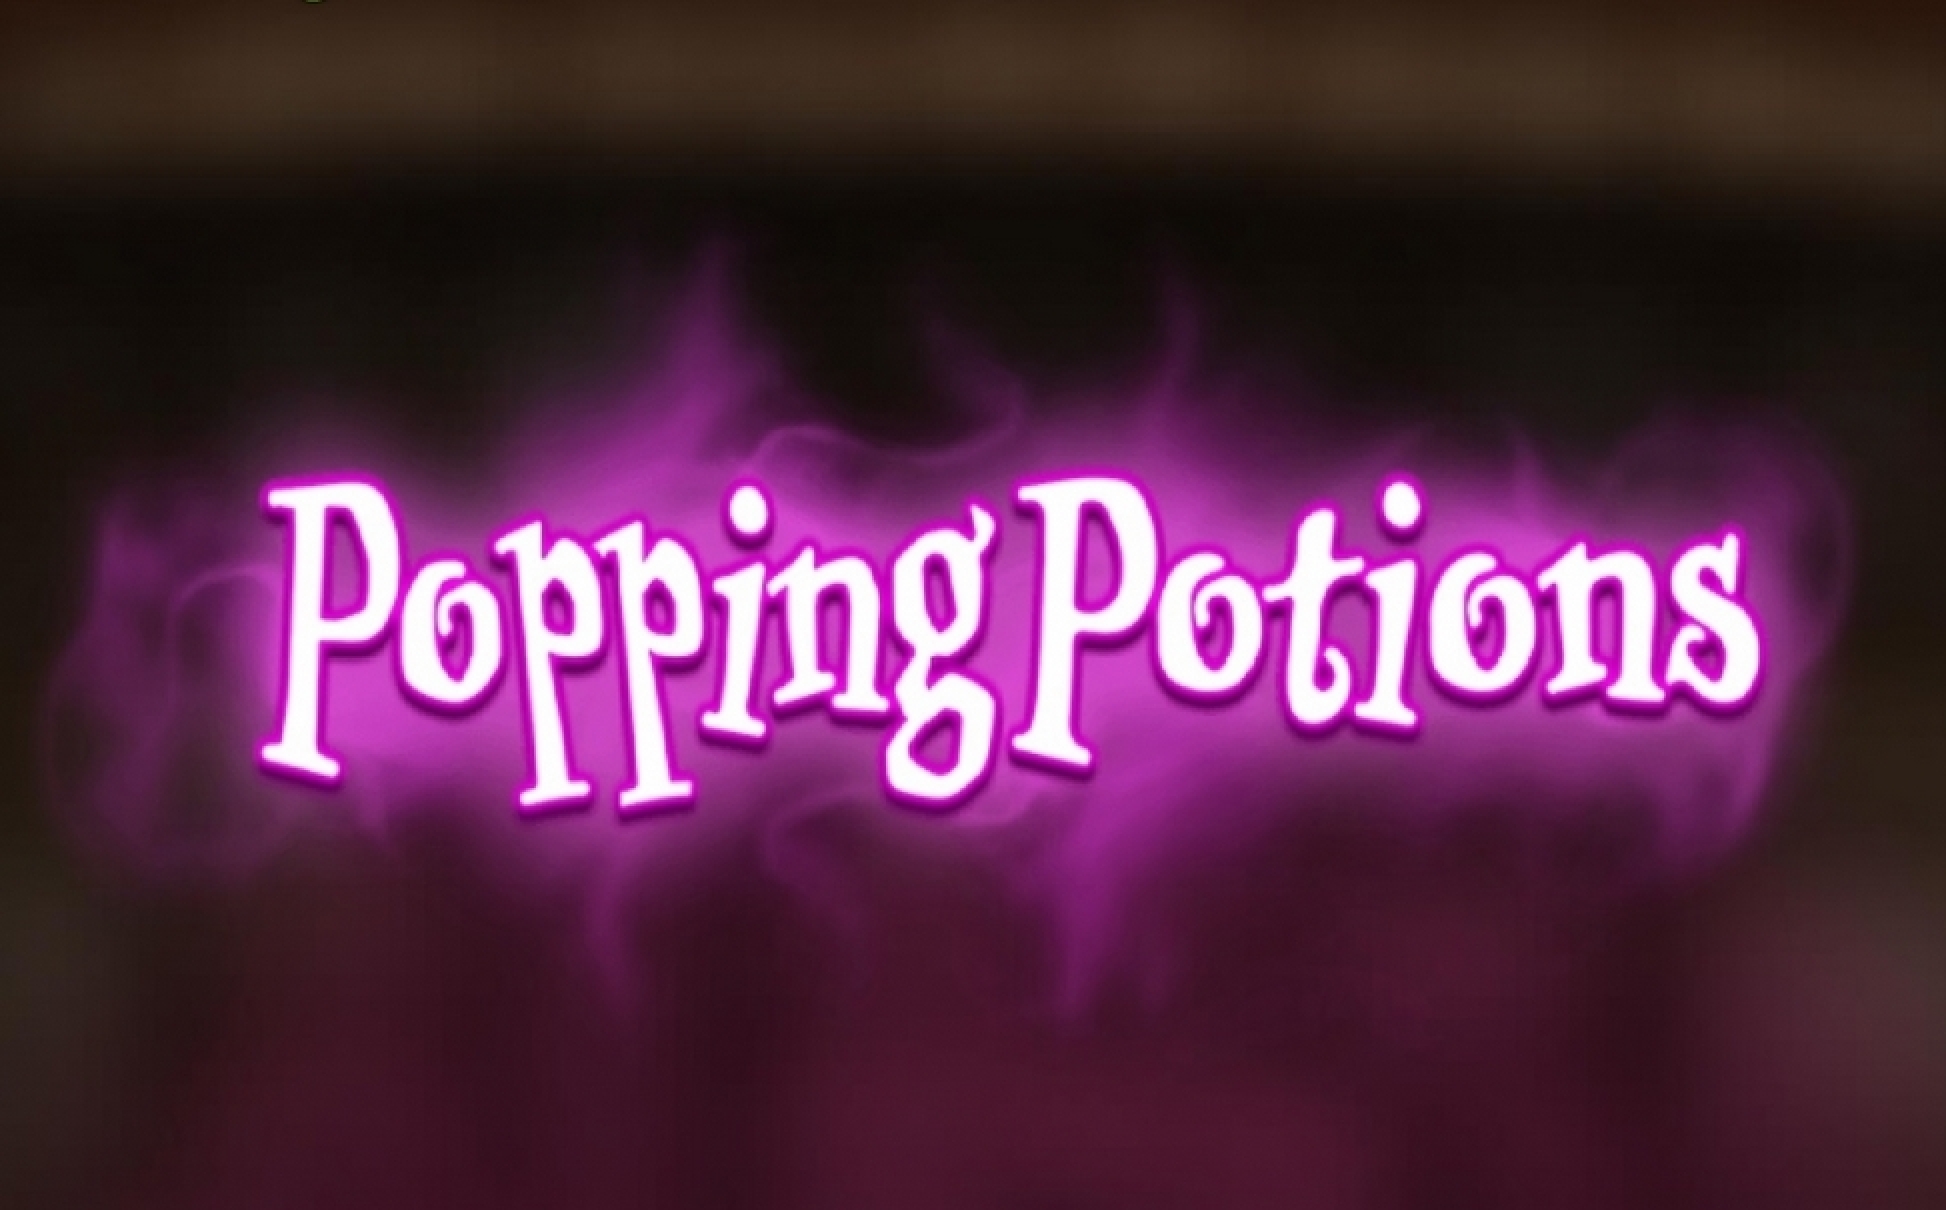 Popping Potions demo